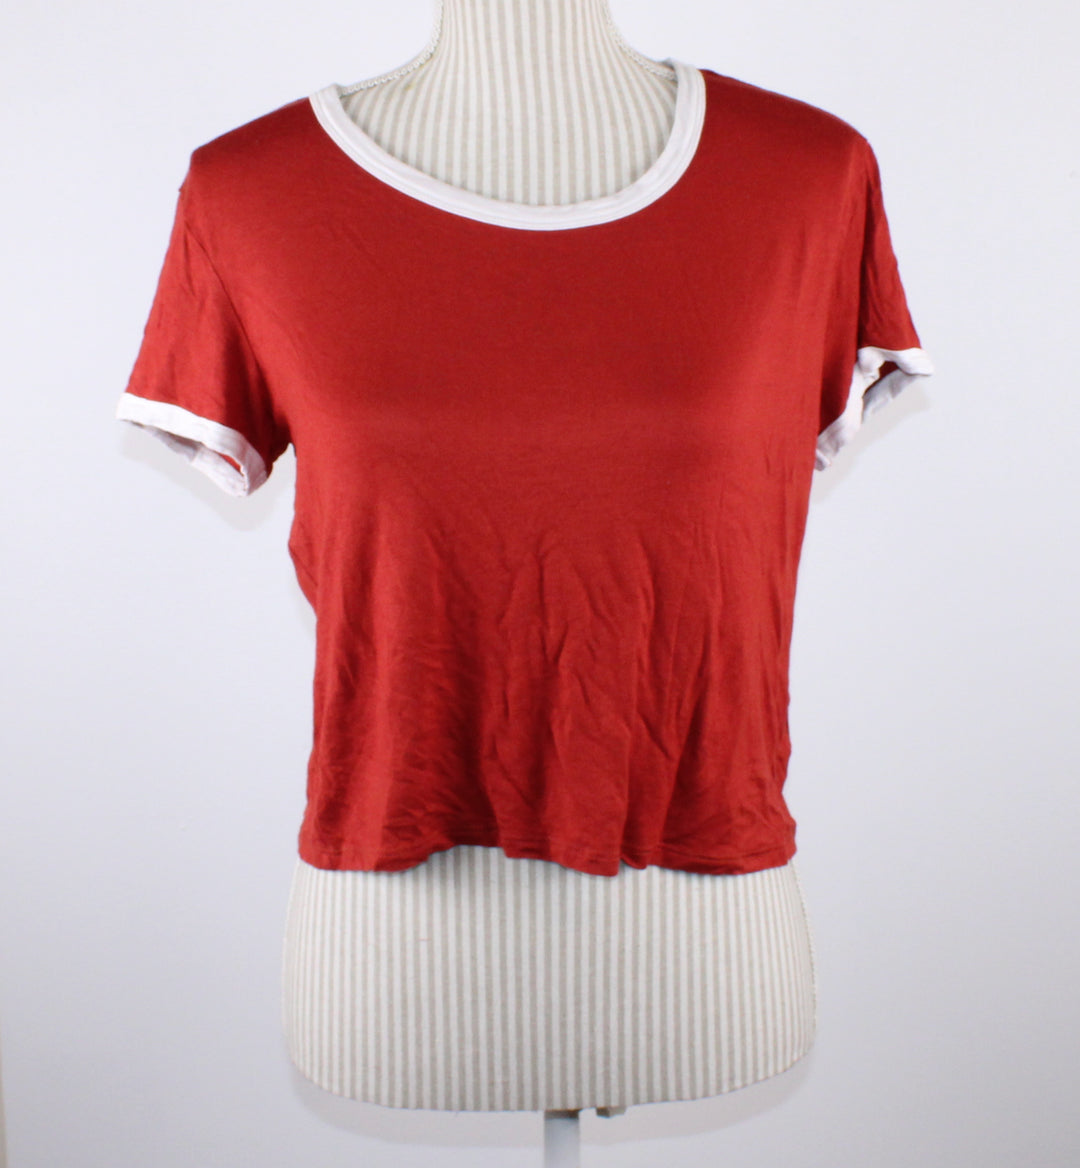 SWS STRETCH SOFT TEE CROPPED LADIES LARGE EUC